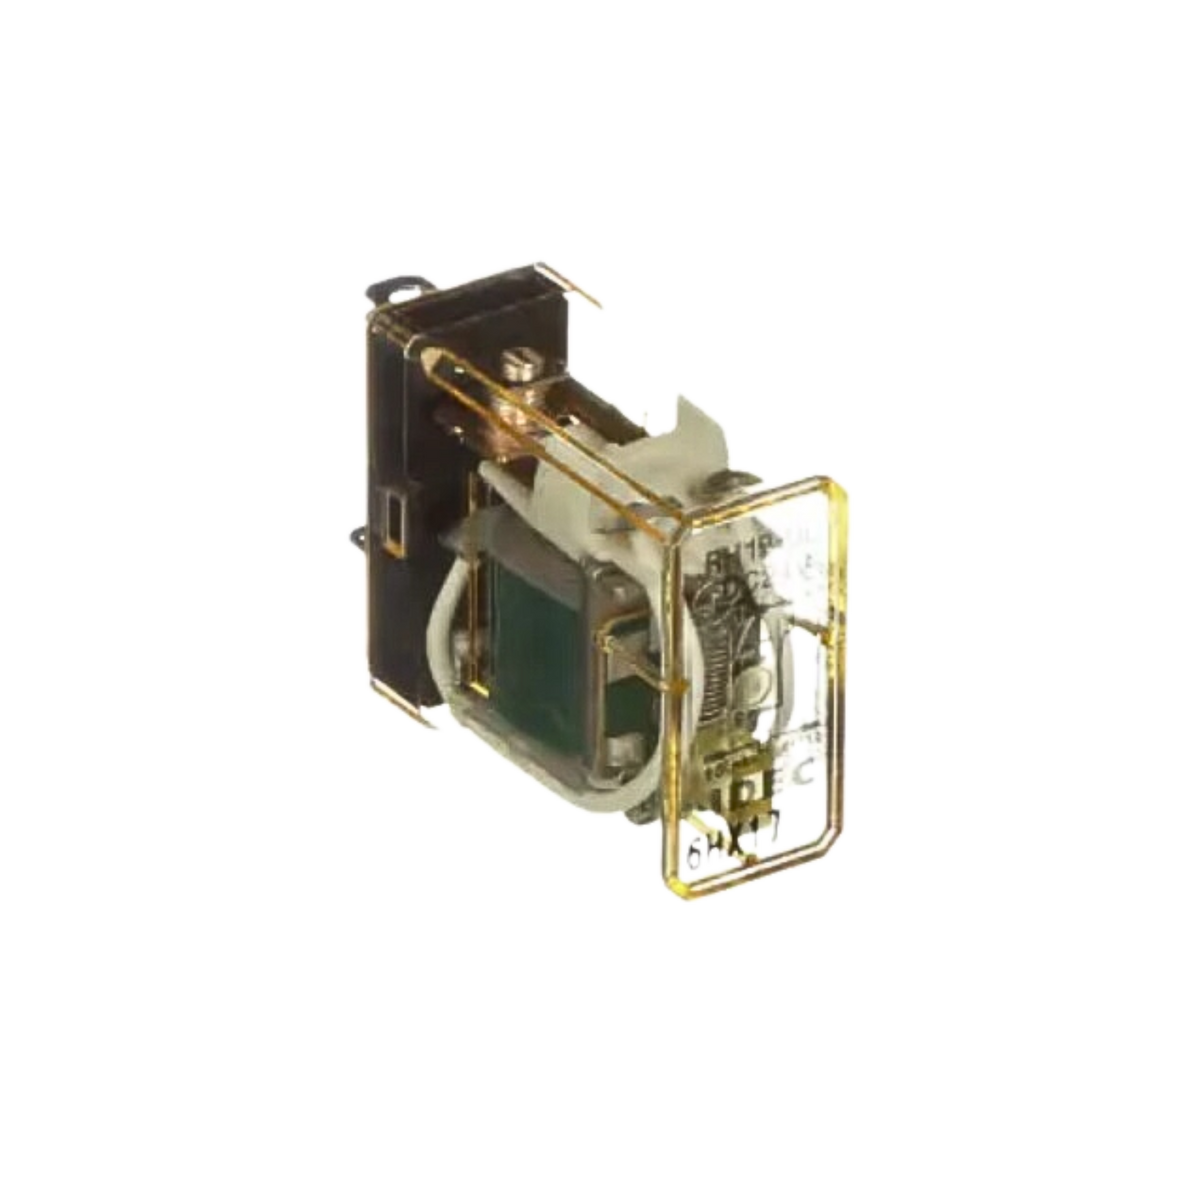 SPDT w/ Light Relay | RH1B-ULDC24V used on Idec product line - Front view